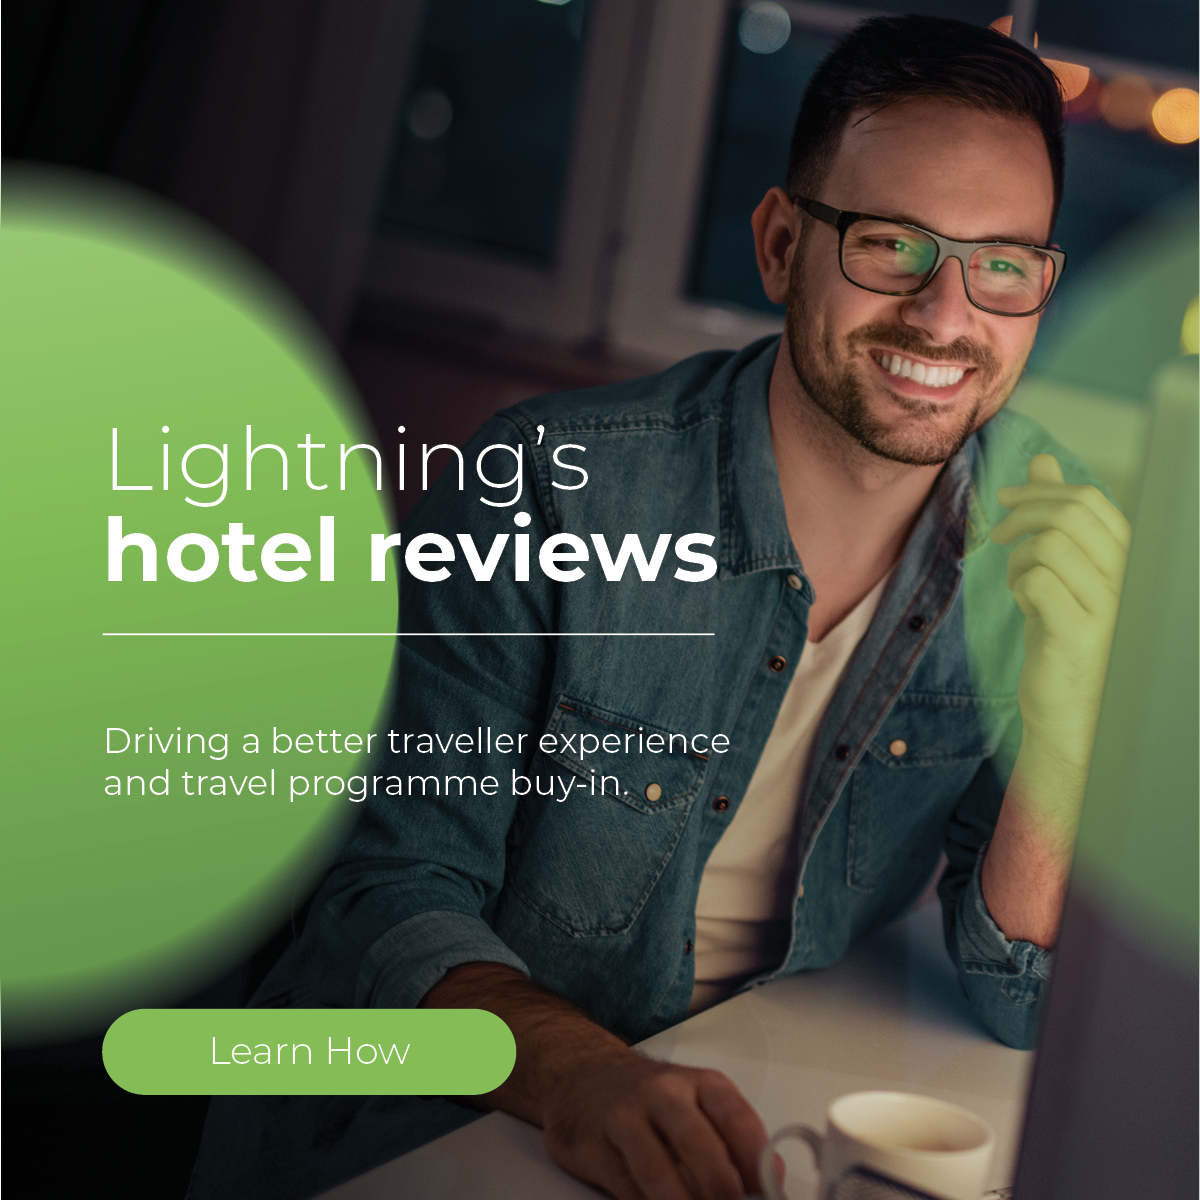 Lightning’s hotel reviews just made business travel even easier